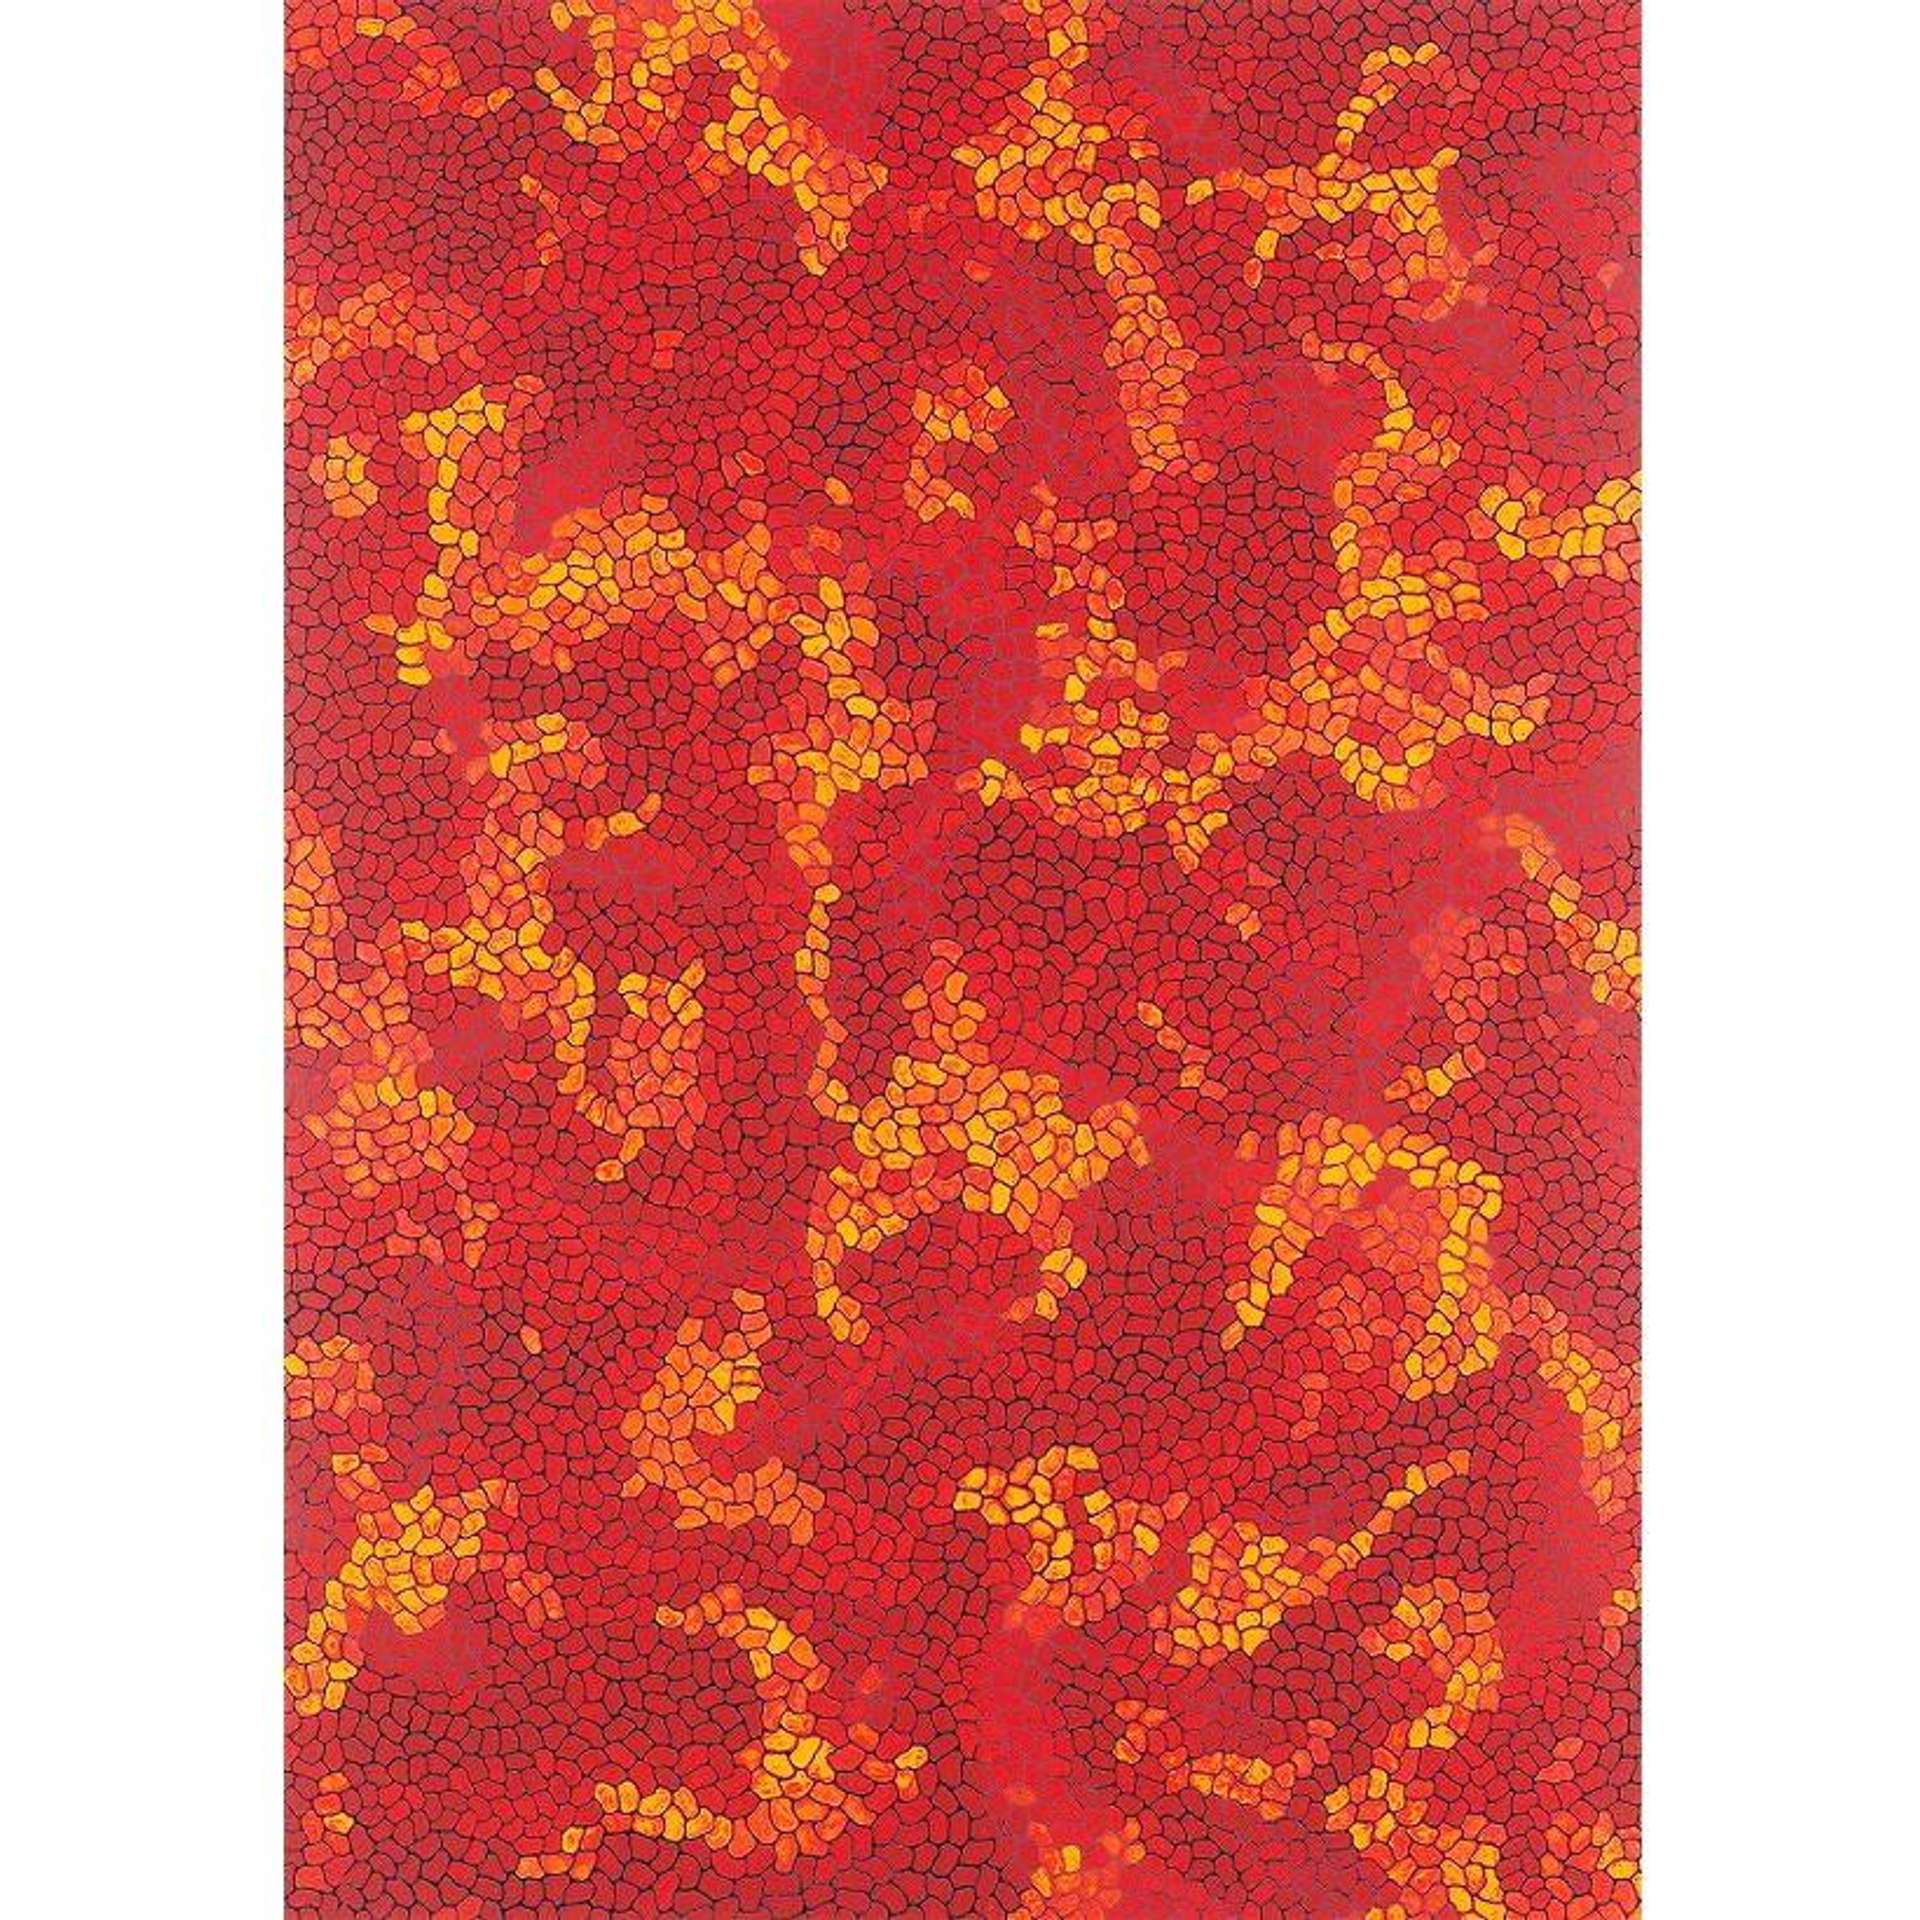 A print by Yayoi Kusama, showing a mosaic-like cloud pattern rendered in oranges, reds and yellows.